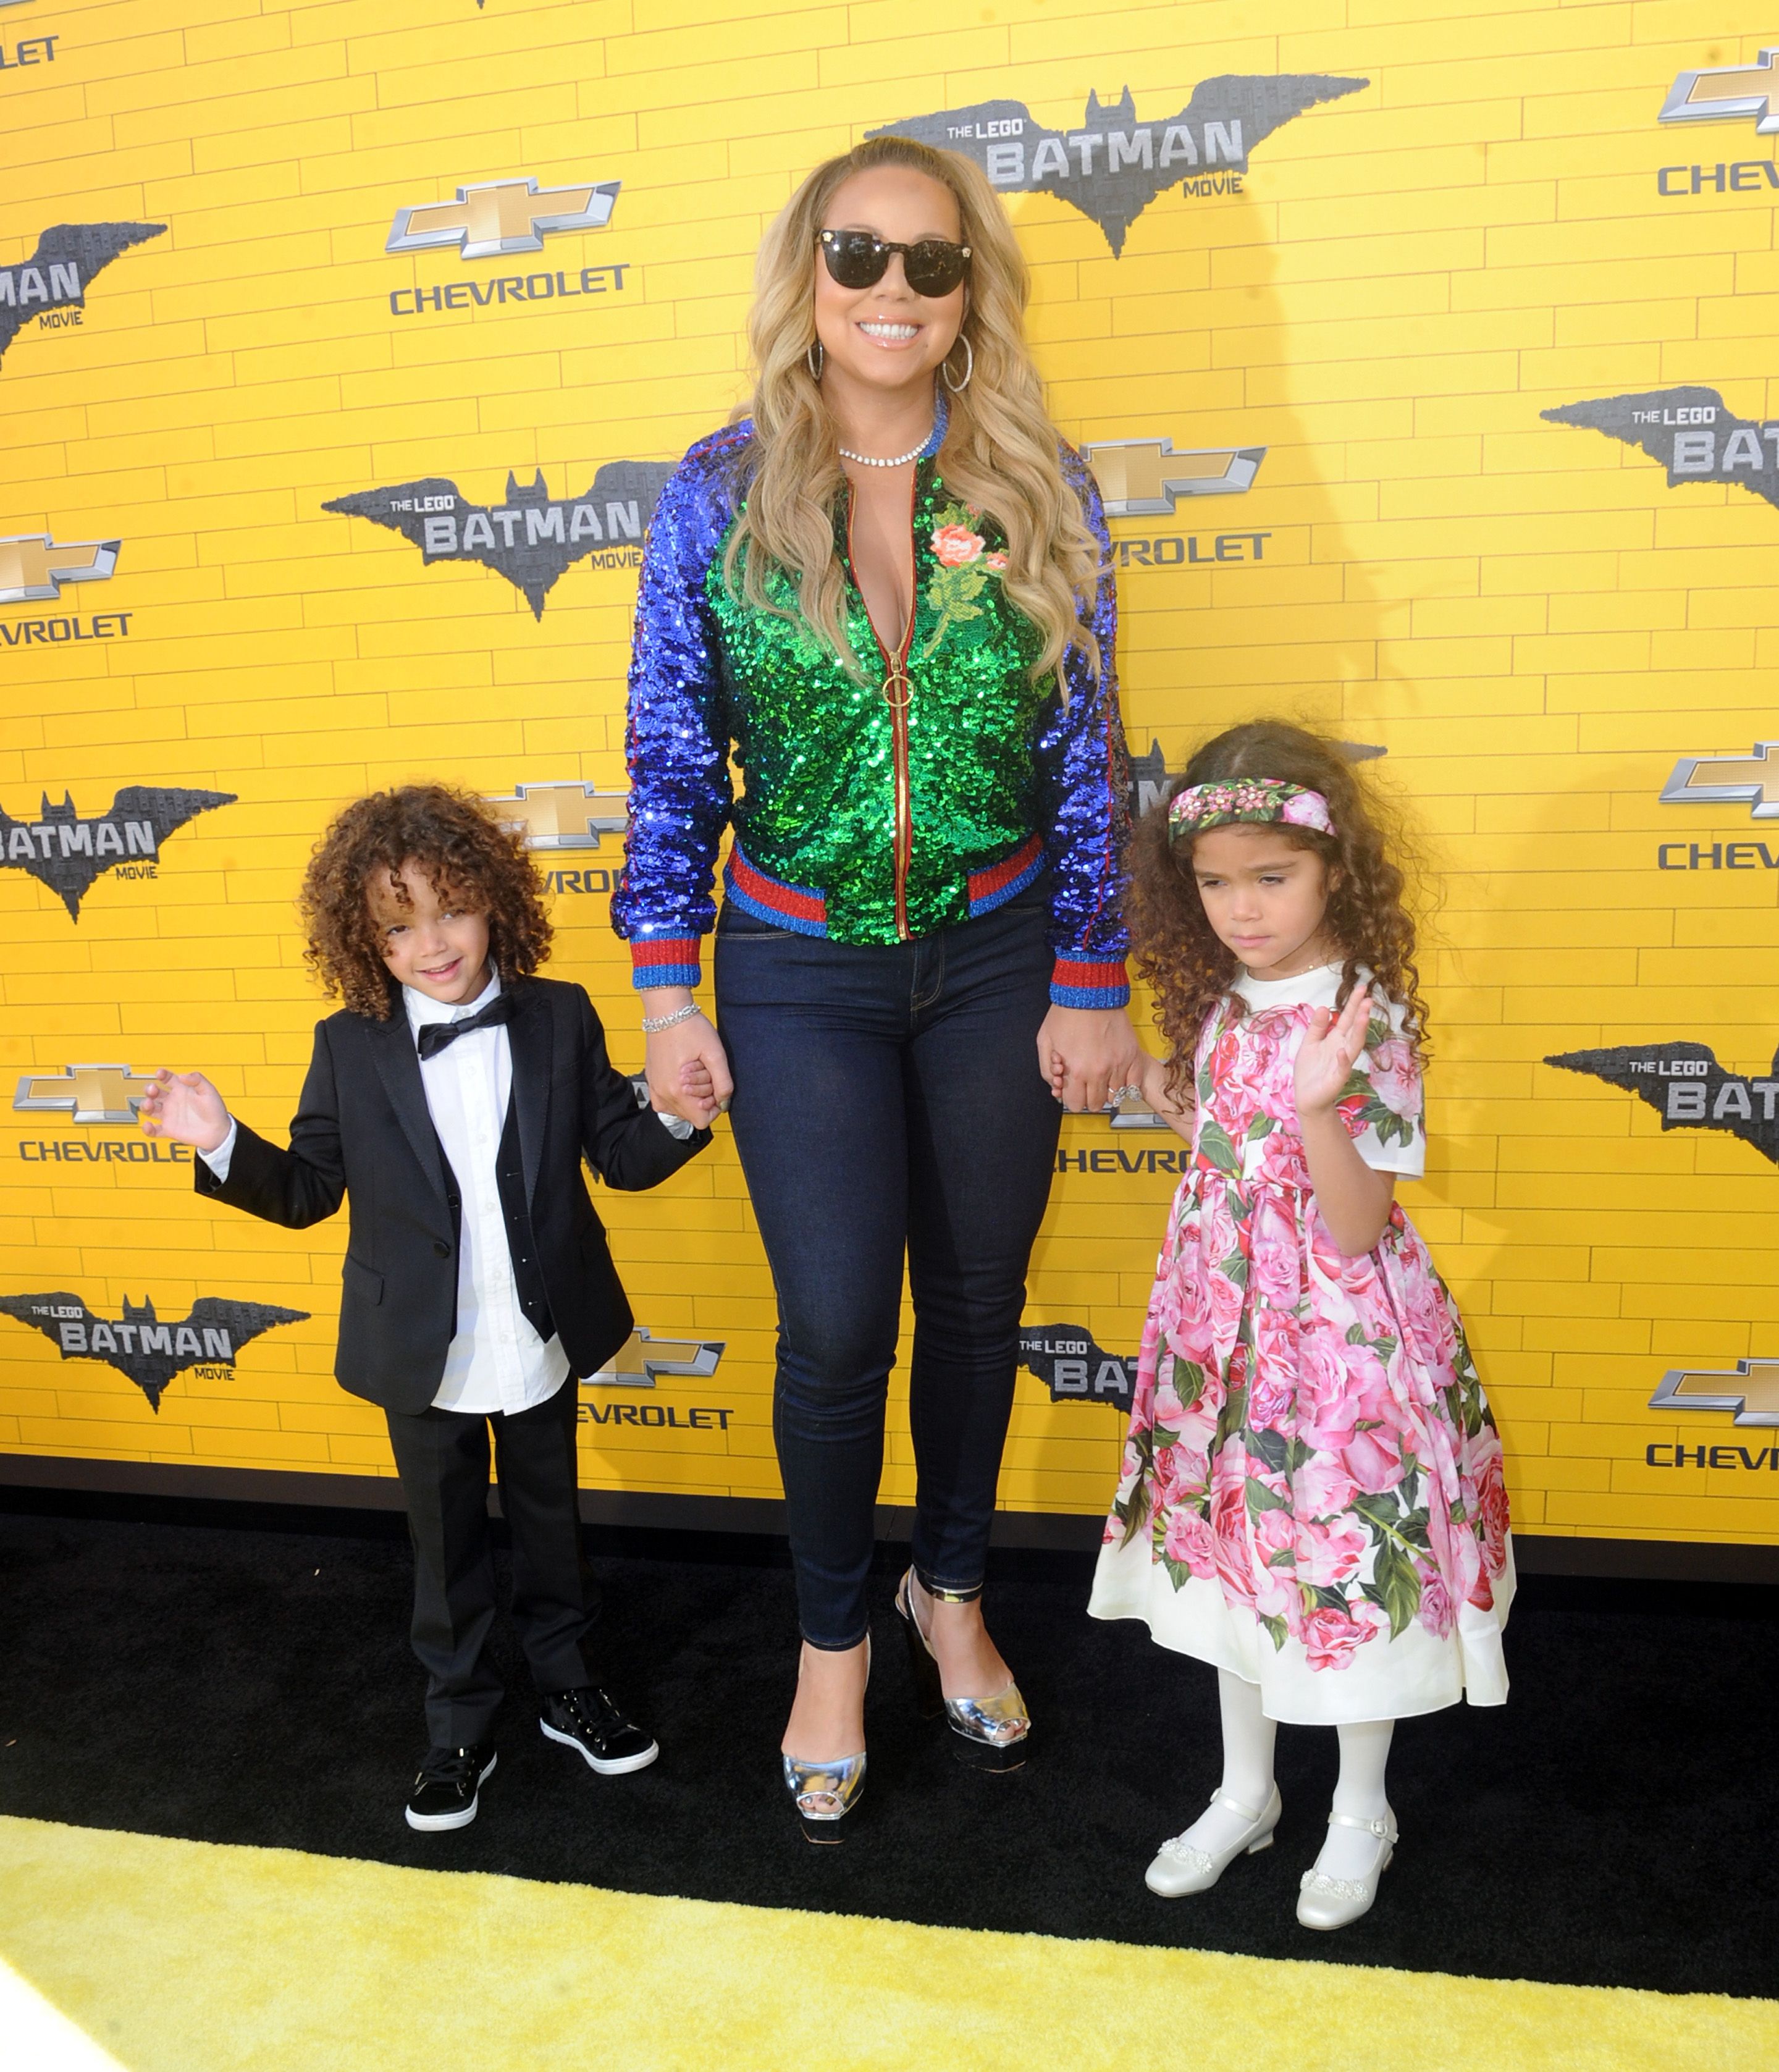 Moroccan Scott Cannon, Mariah Carey, and Monroe Cannon at the premiere of "The LEGO Batman Movie" on February 4, 2017, in Westwood, California | Photo: Albert L. Ortega/Getty Images